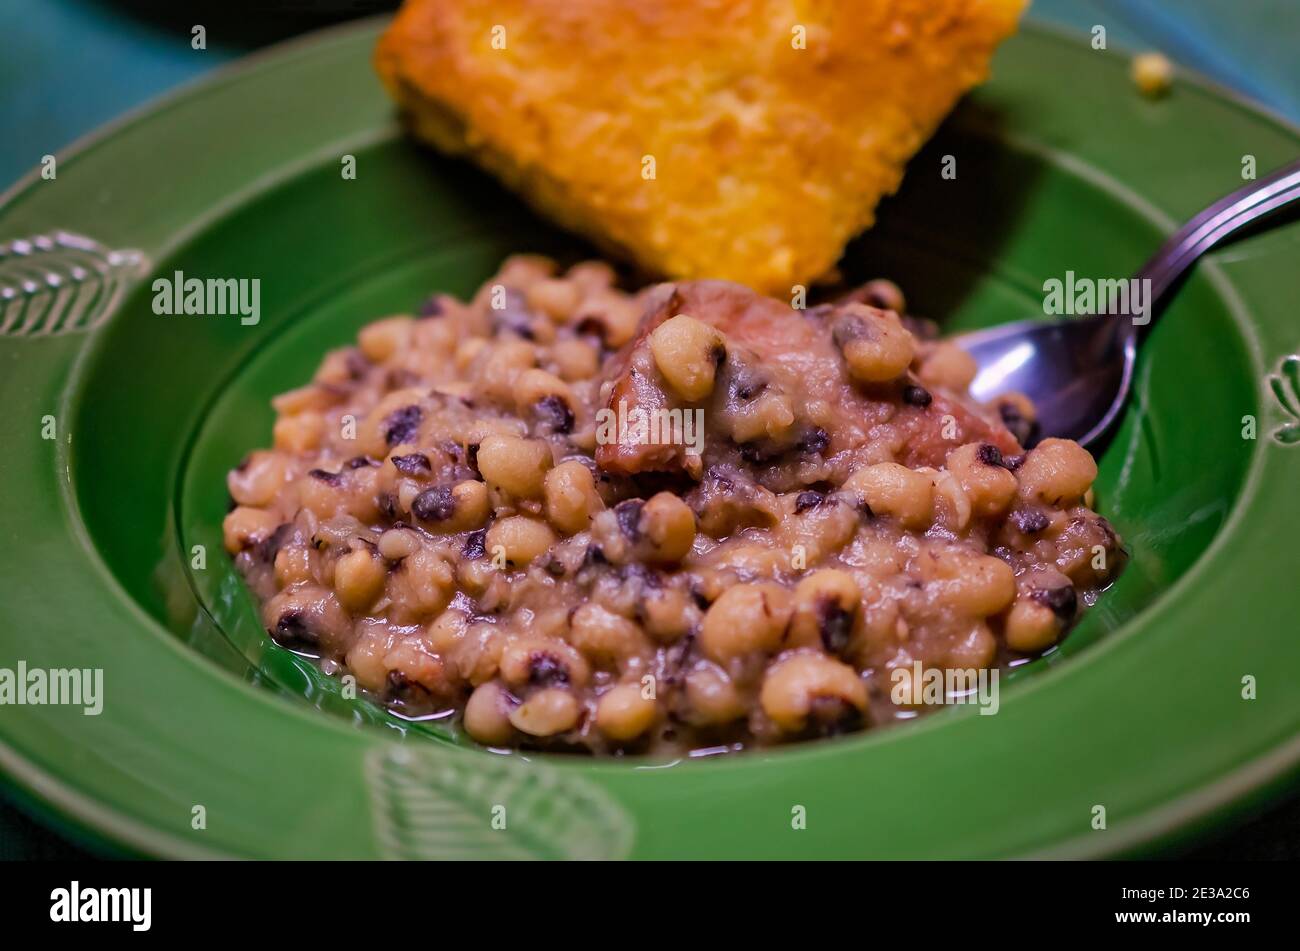 Black-eyed peas, also known as Hoppin’ John, is served with cornbread as a traditional New Year’s Day dinner in the Southern United States. Stock Photo